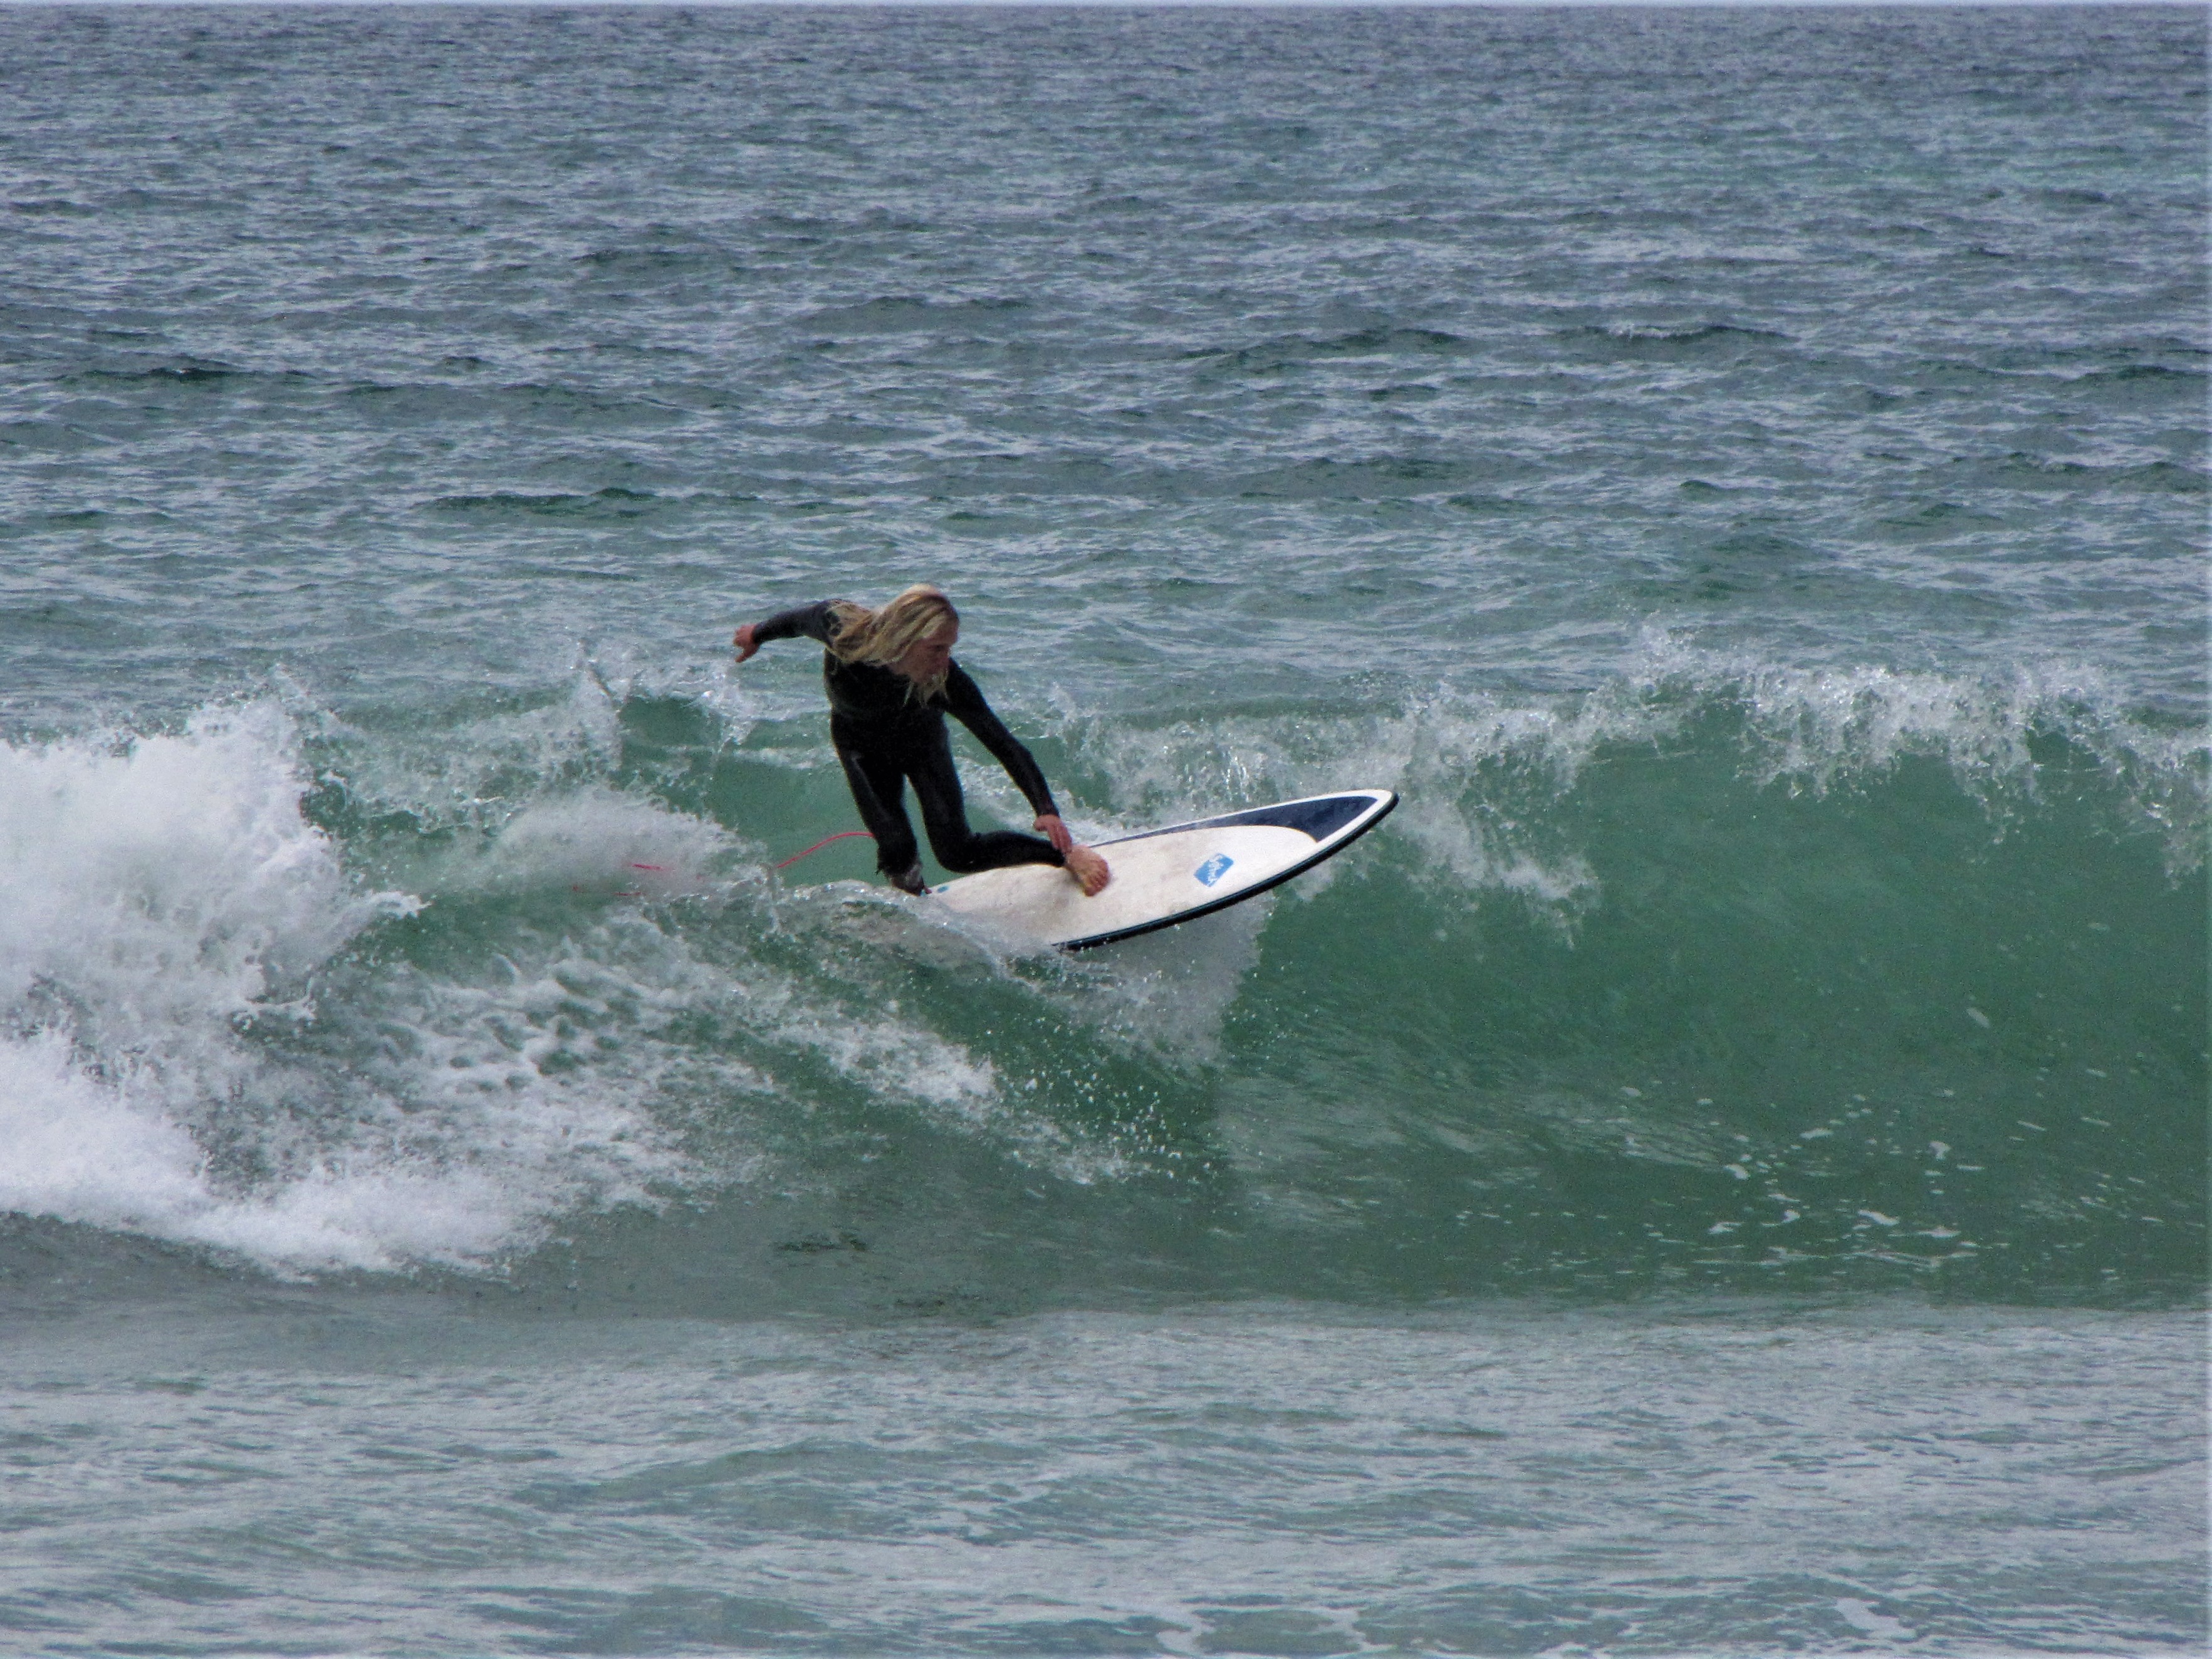 softech surfboard softtop at the sea in Lagos Algarve Portugal